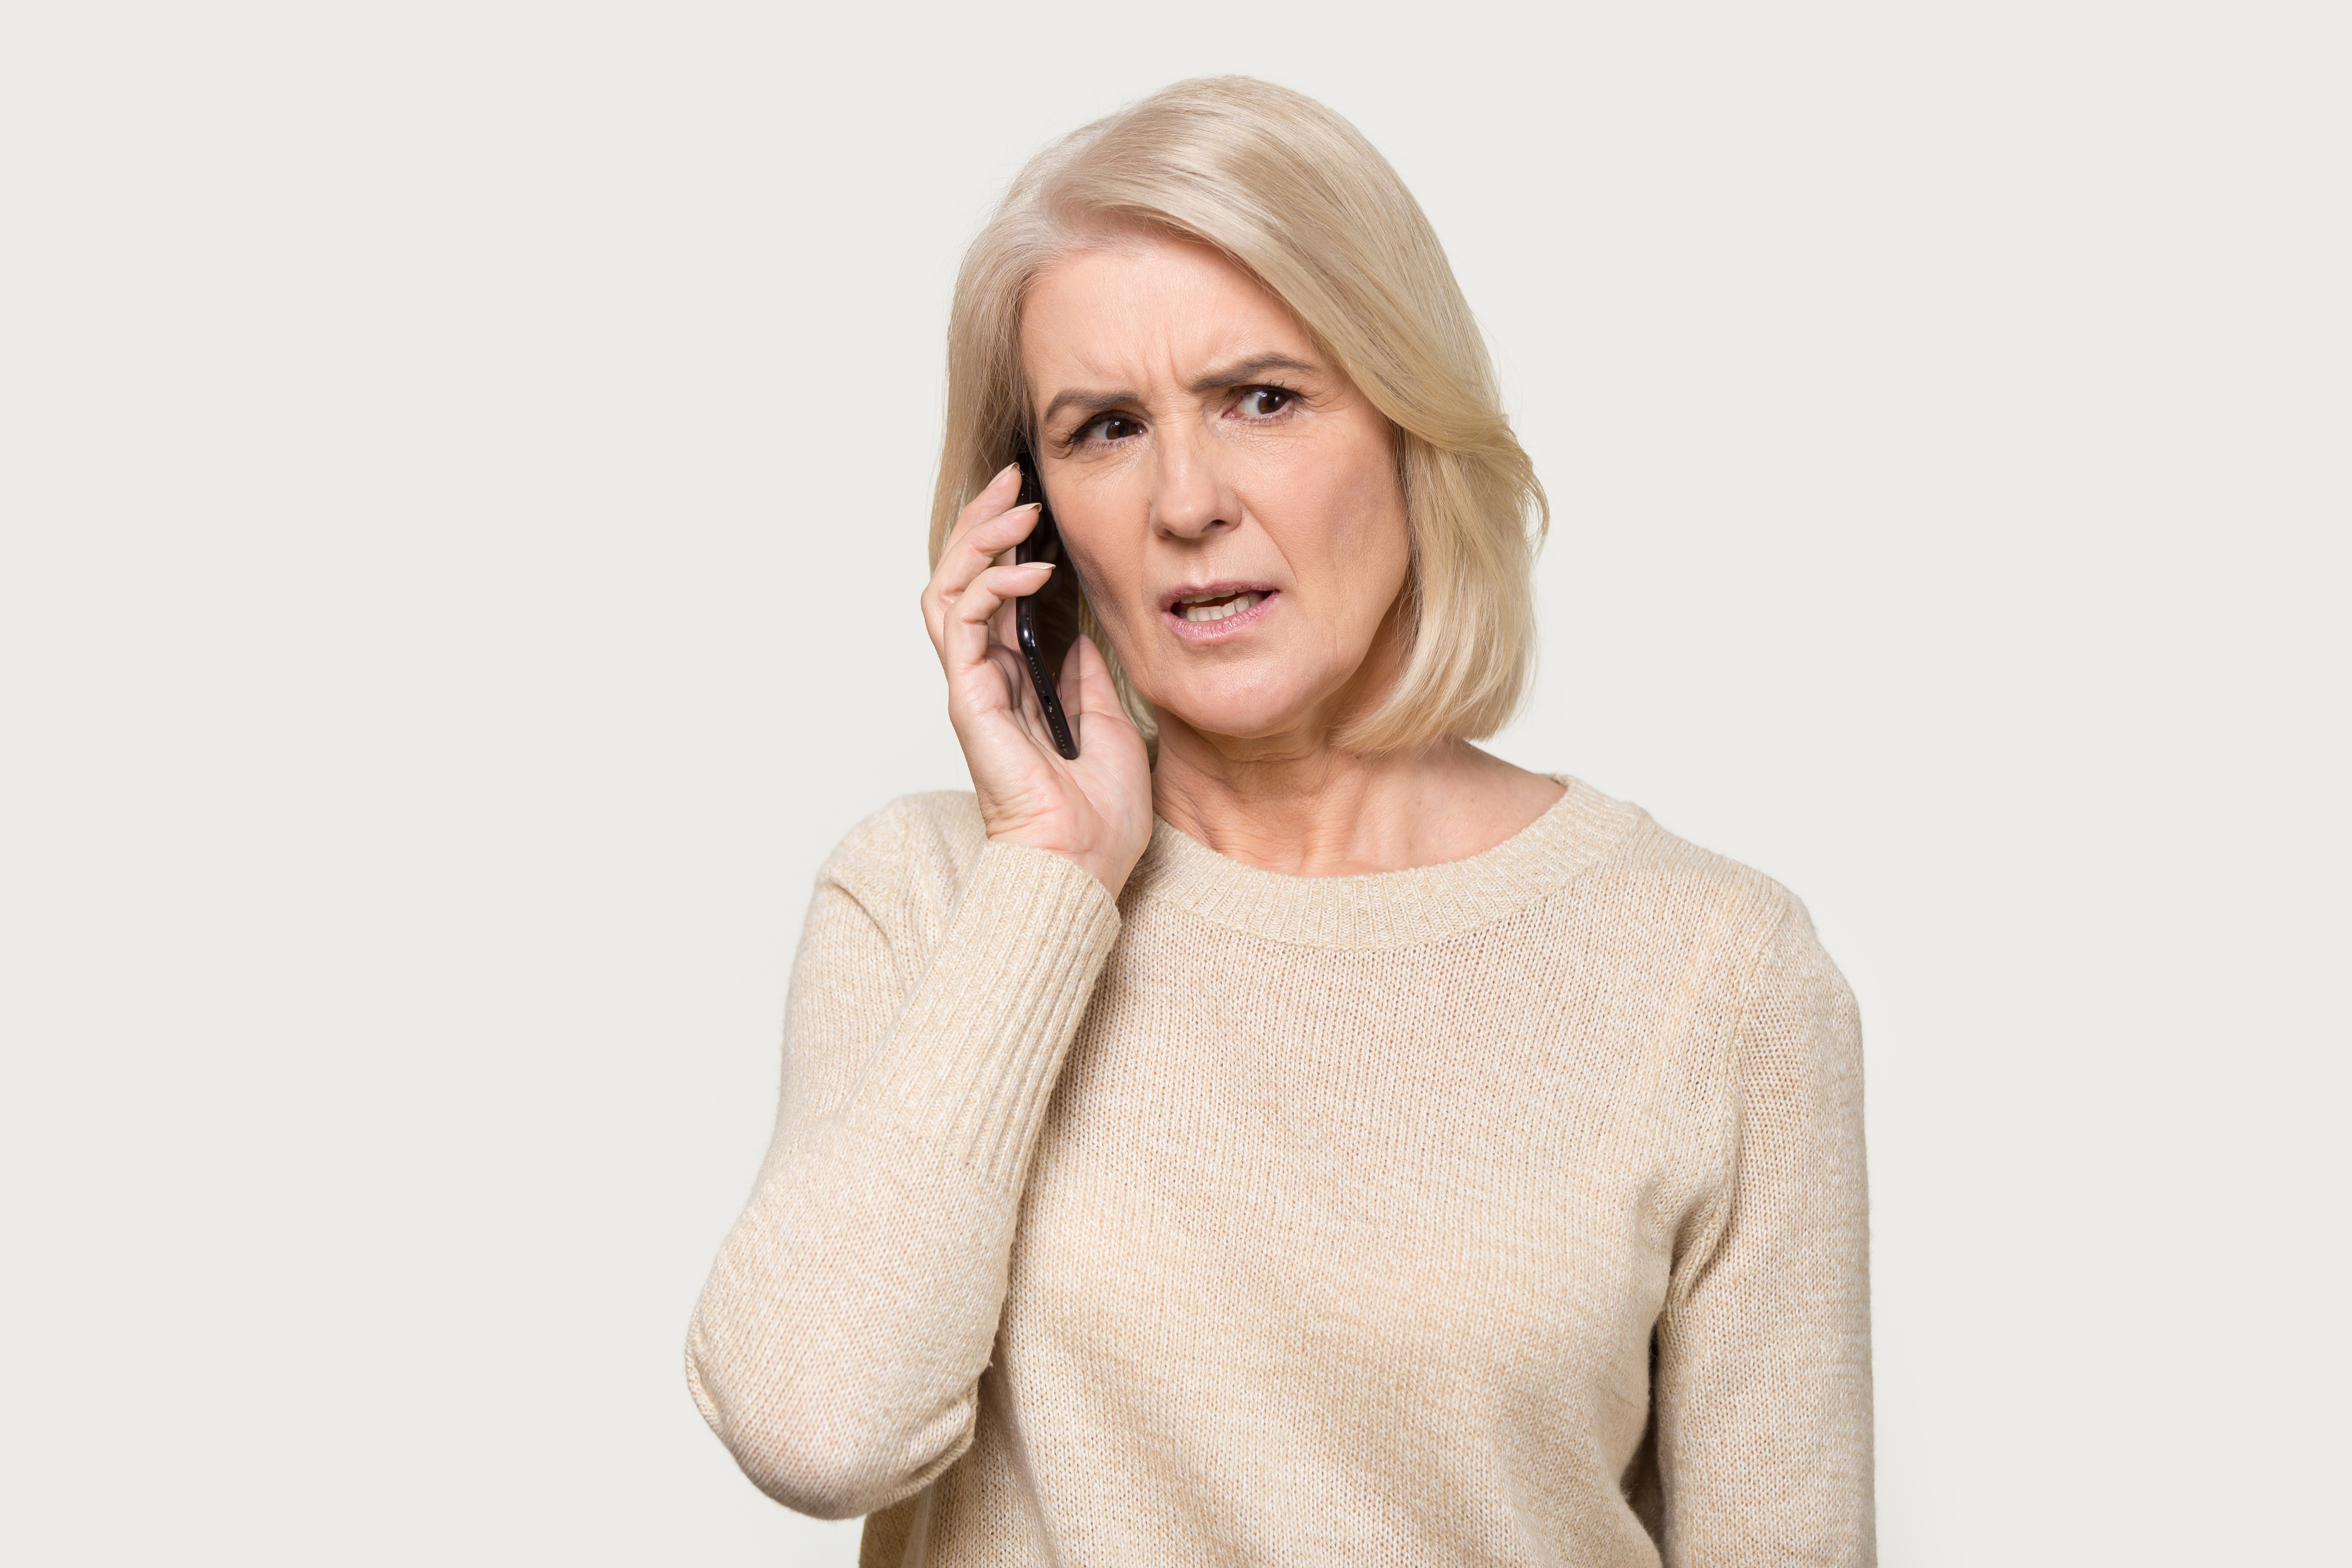 A woman looking worried while on the phone | Source: Shutterstock